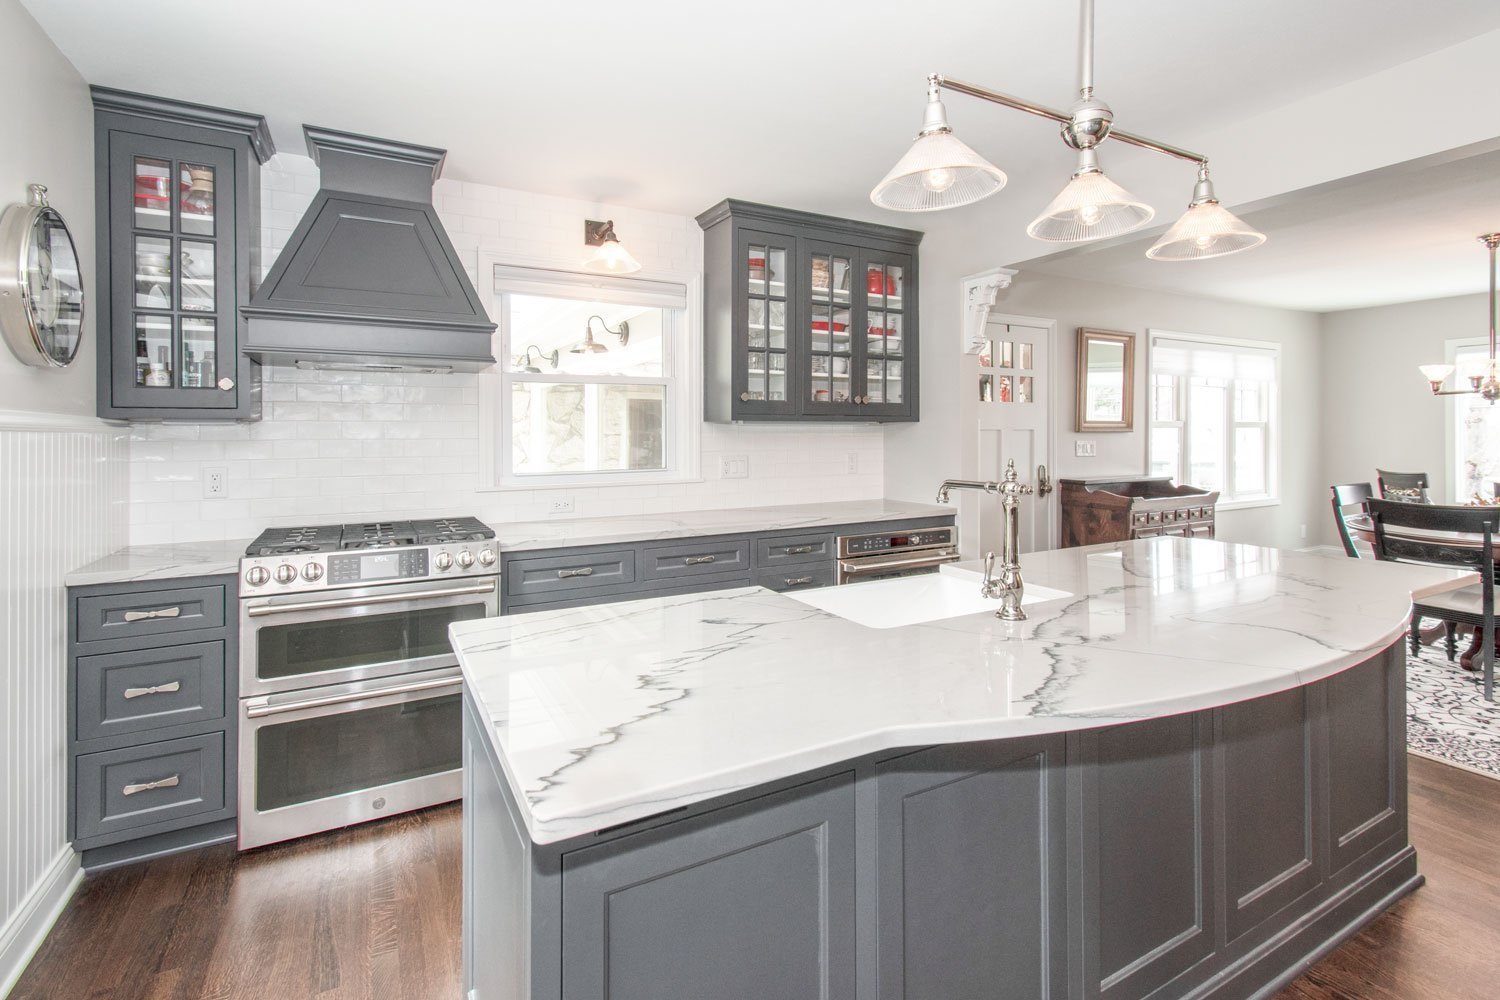 Delafield Kitchen with gray cabinets, quartz counters and white subway tile